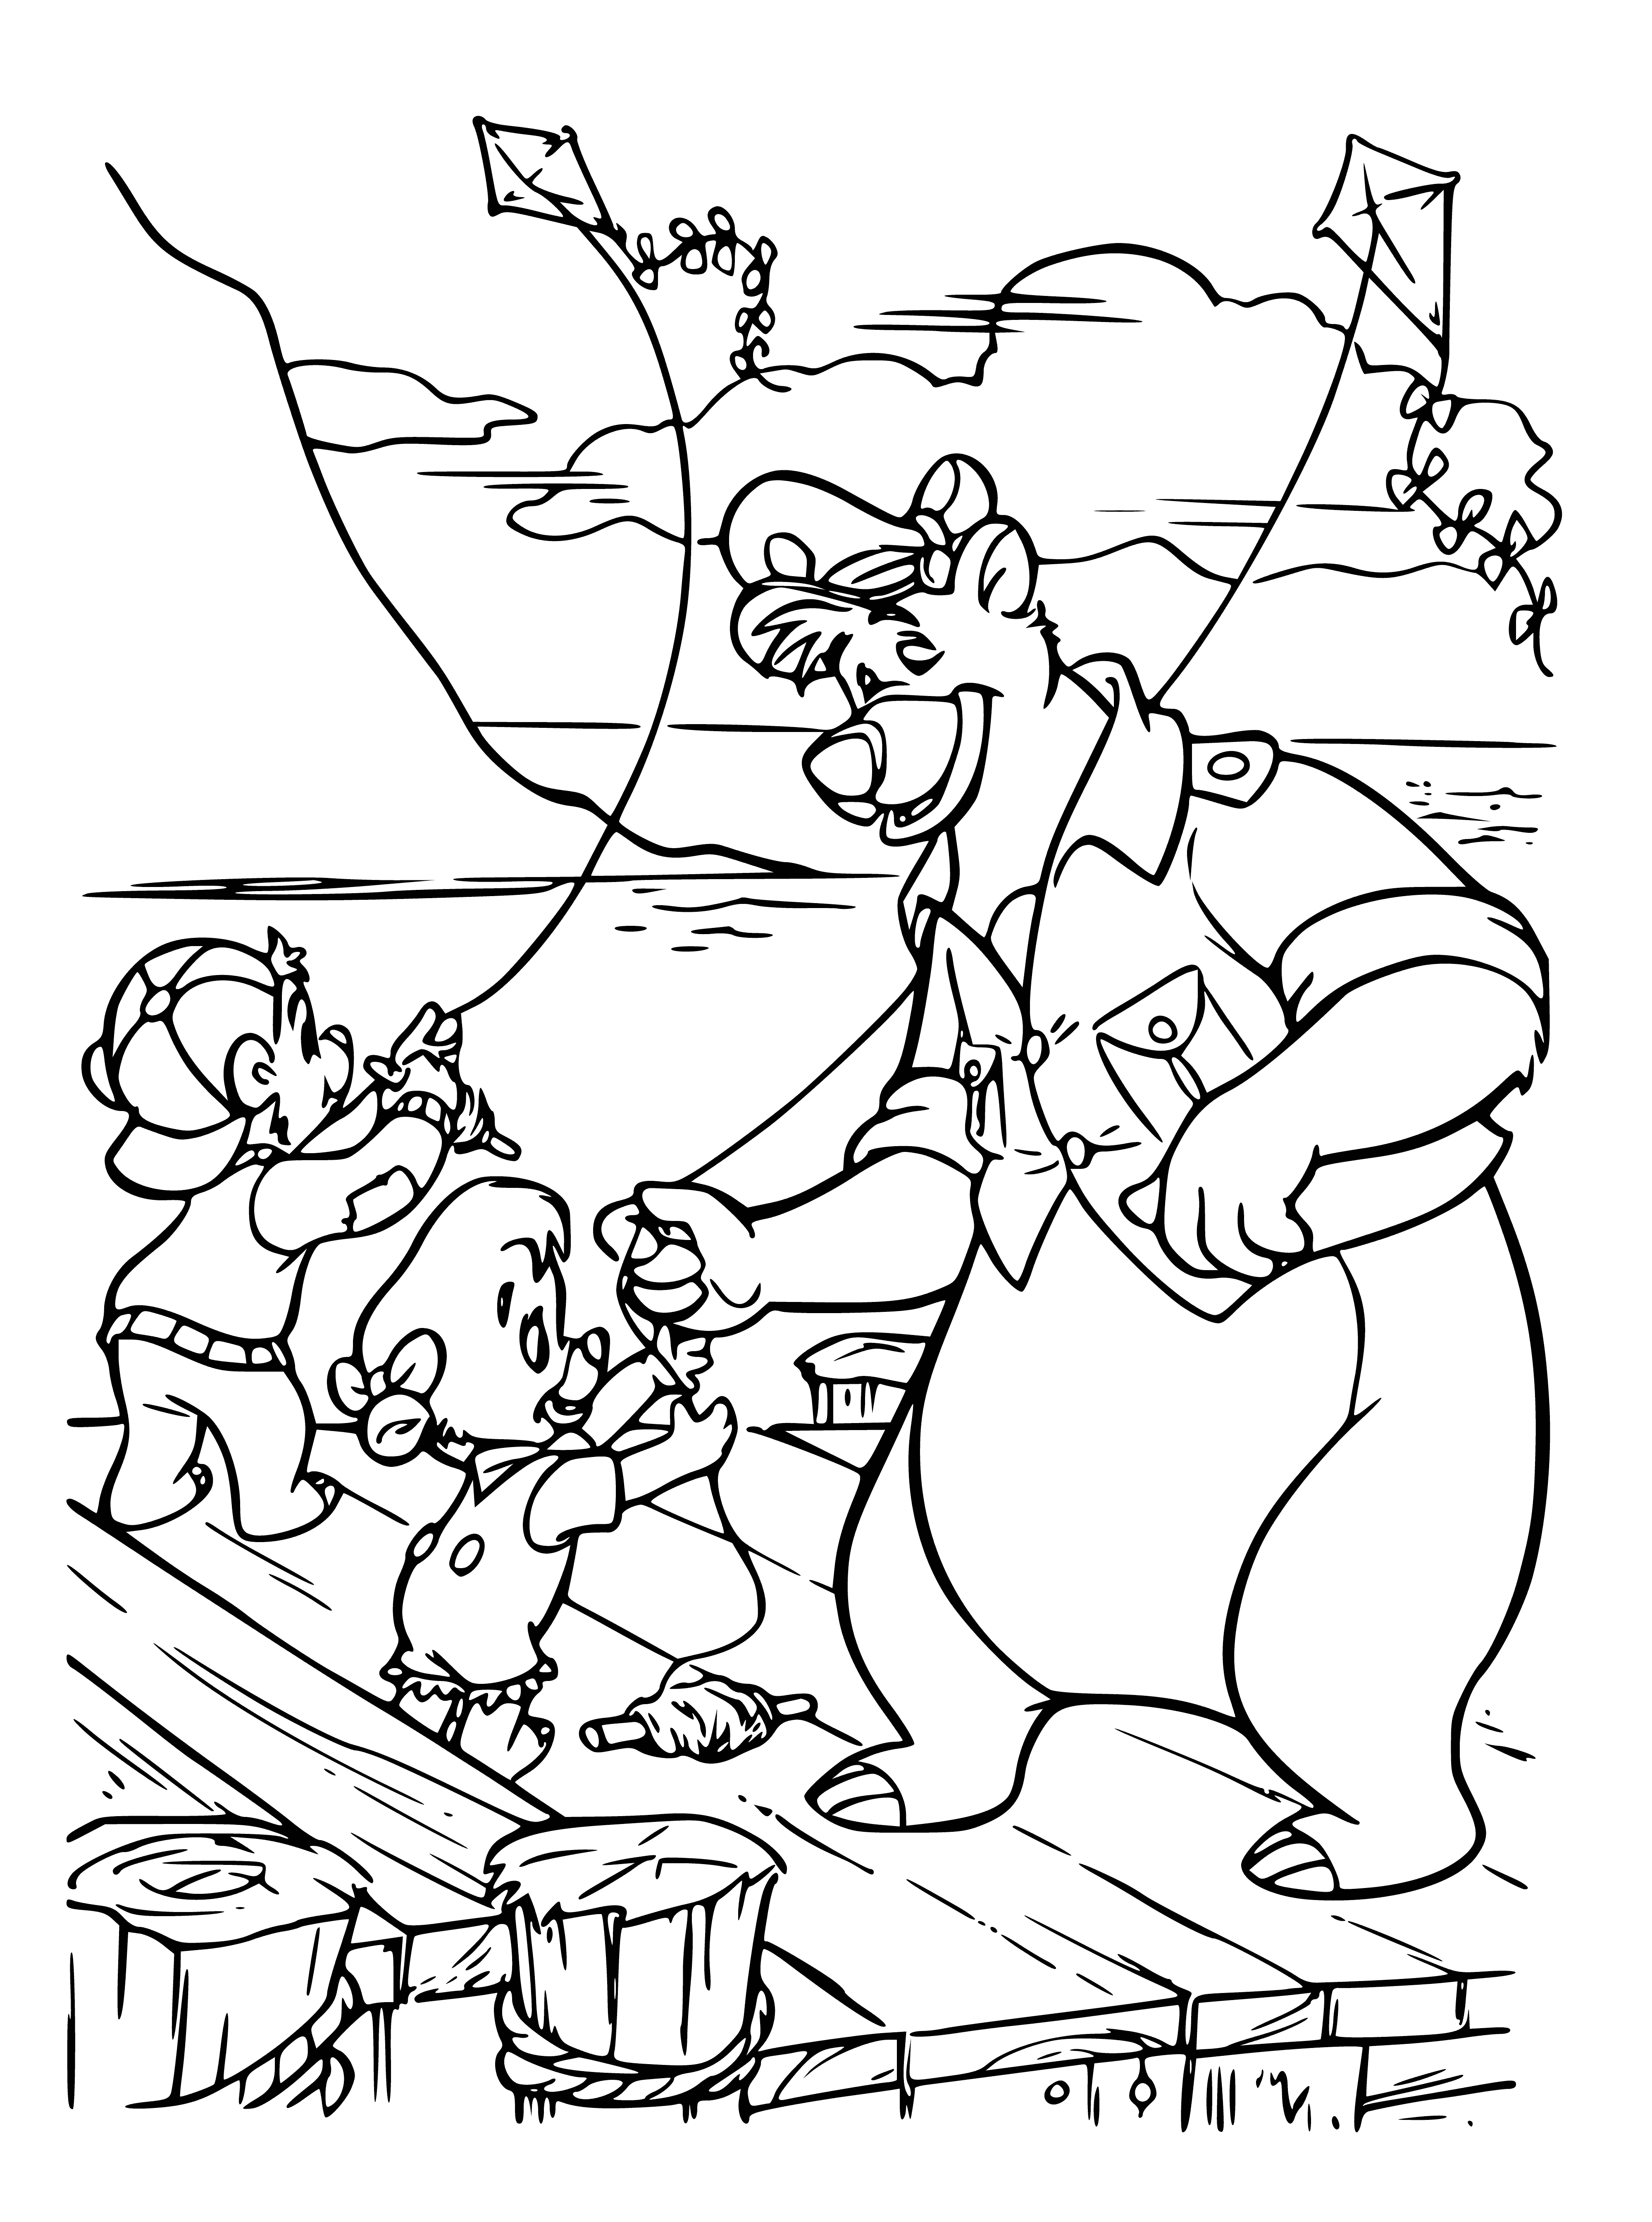 coloring page: Kids having a blast flying kites on a windy day. Smiles all around!